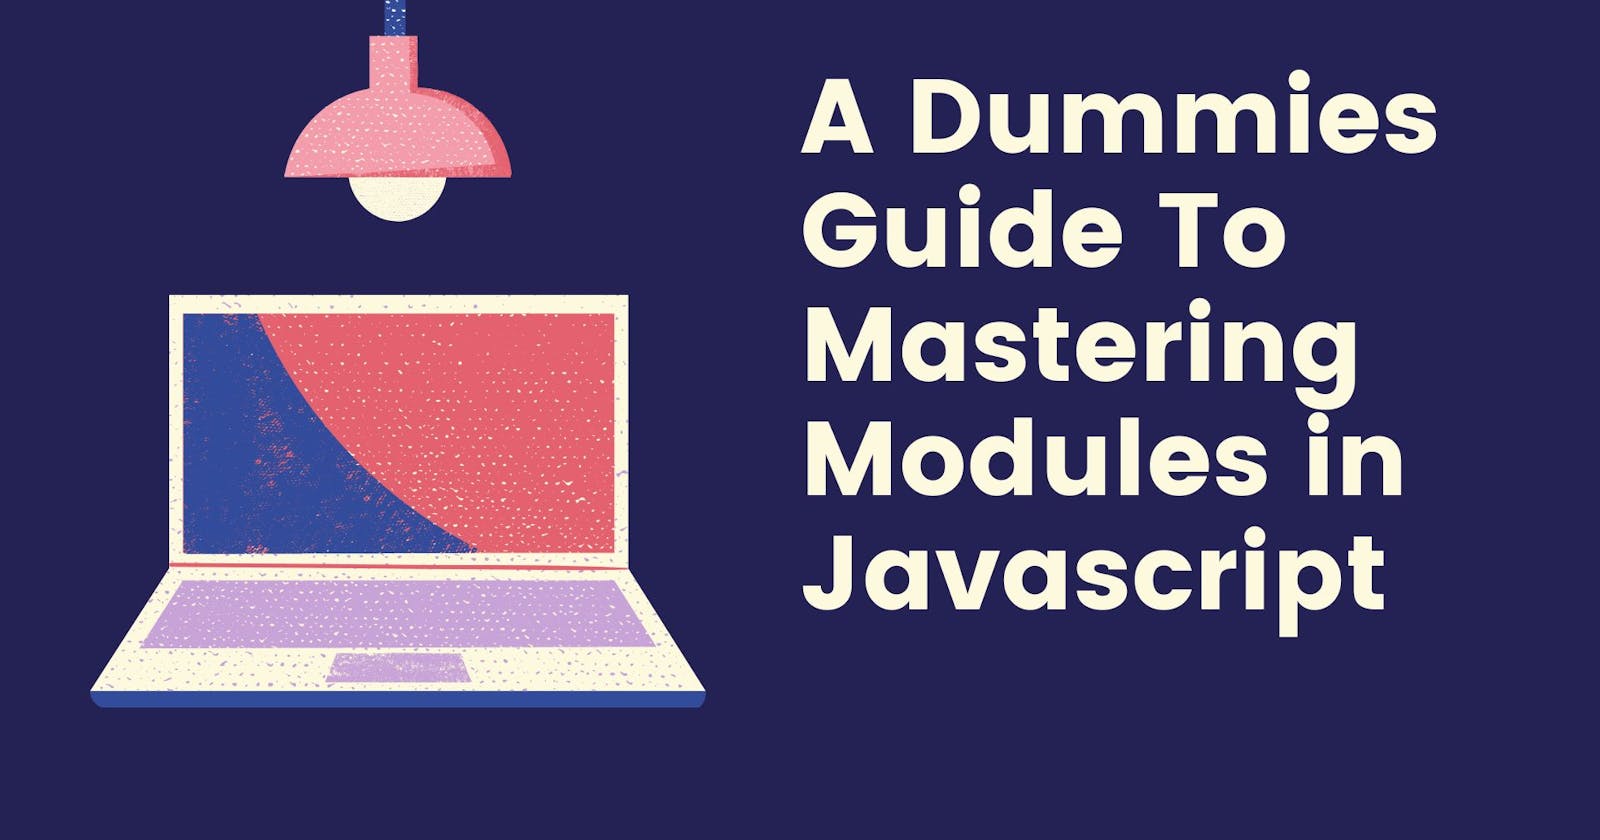 A Dummies Guide To Mastering Modules in Javascript